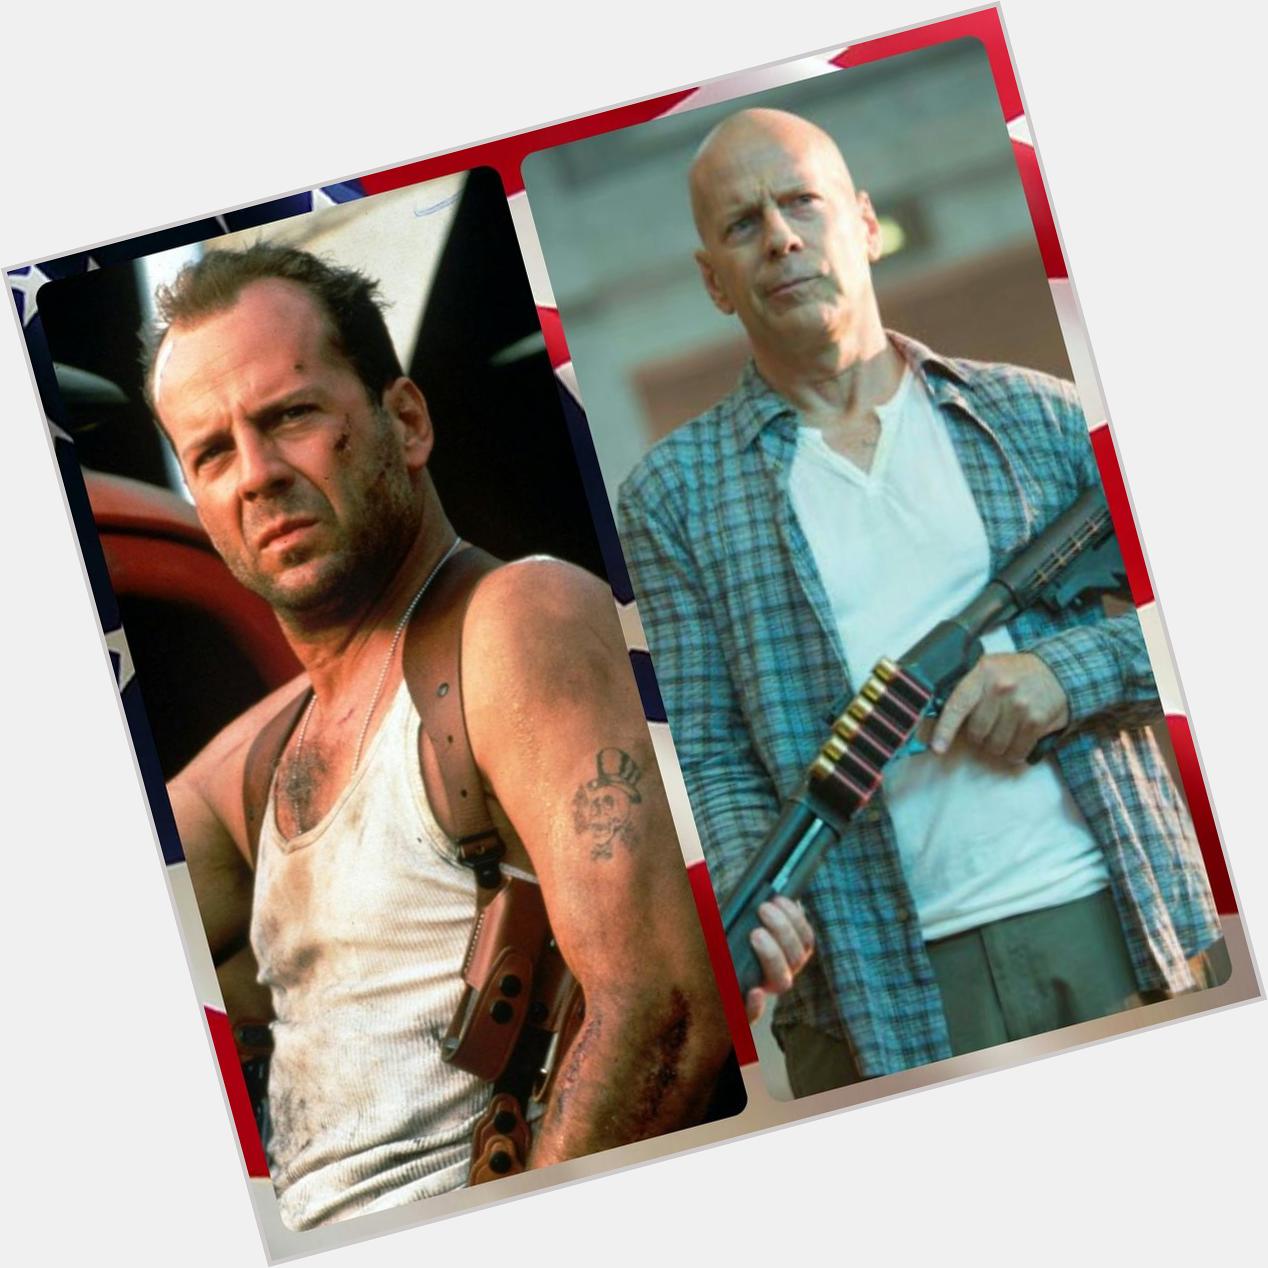 Mandatory \"Happy 60th Birthday Bruce Willis\" message, because I\m a man and Bruno is one of my heroes. 